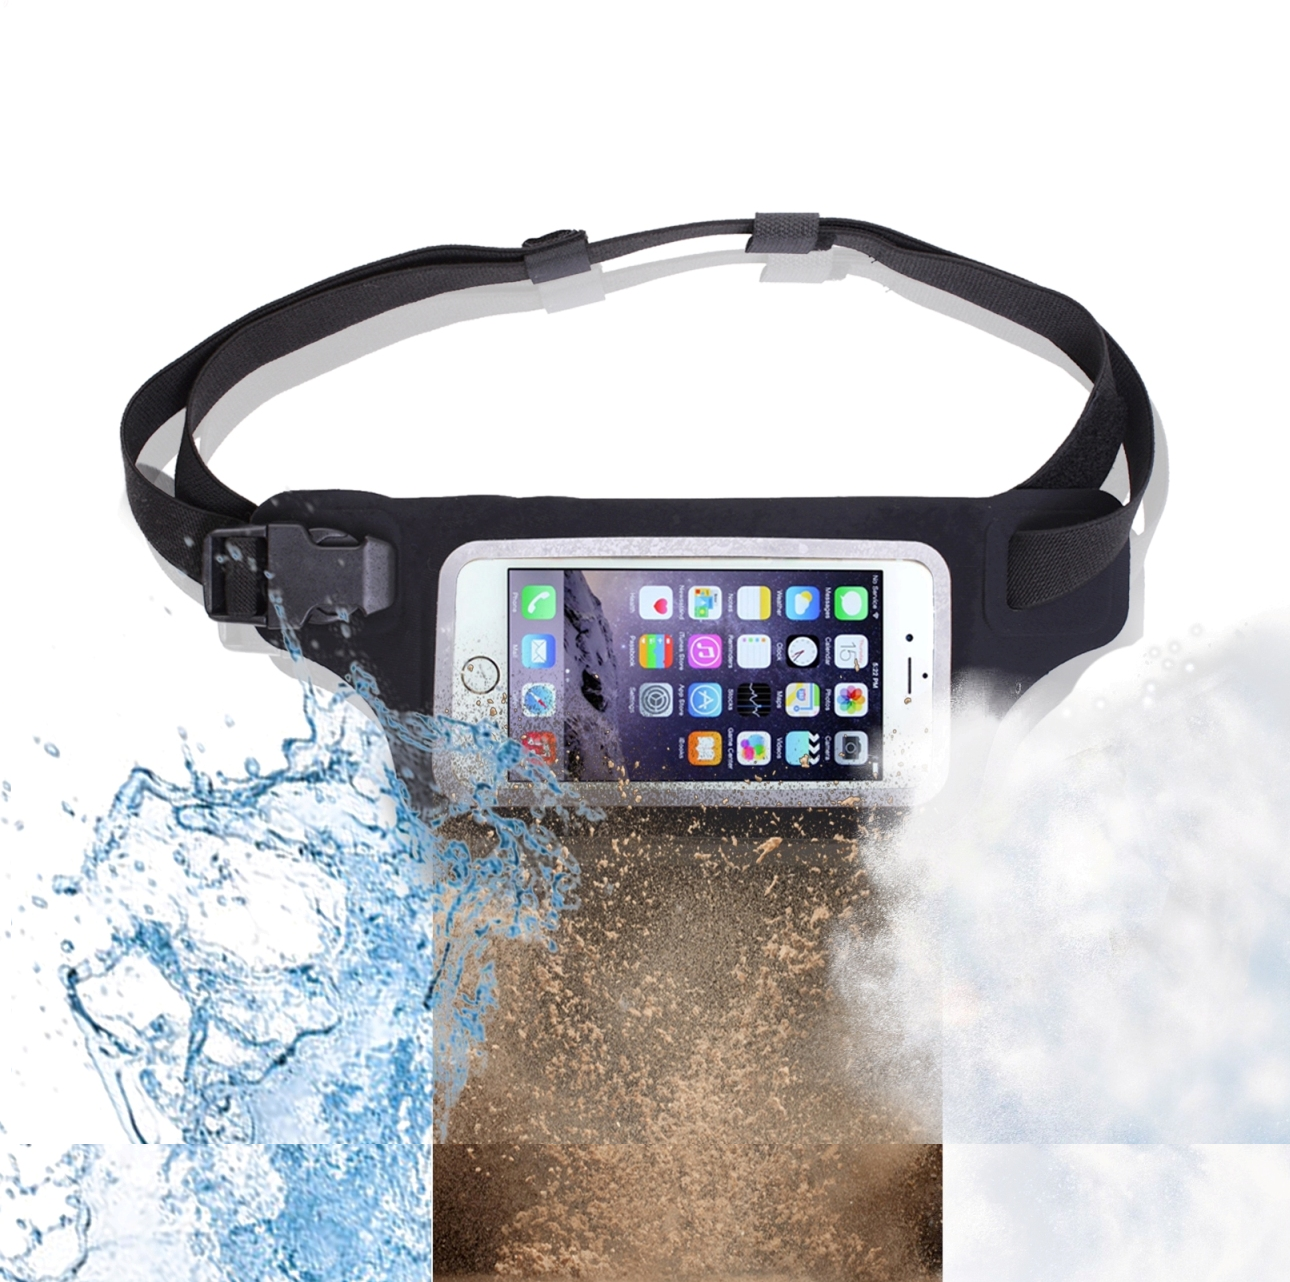 New Waterproof Running Belt Fanny Pack for iPhone 7, X, 8 and Samsung S7/8/9 (Slim Case) - W/Touchscreen Ready Window - IPX8 Rated Waist Bag for Fitness, Travel, Beach, Kayaking, Swimming and more!